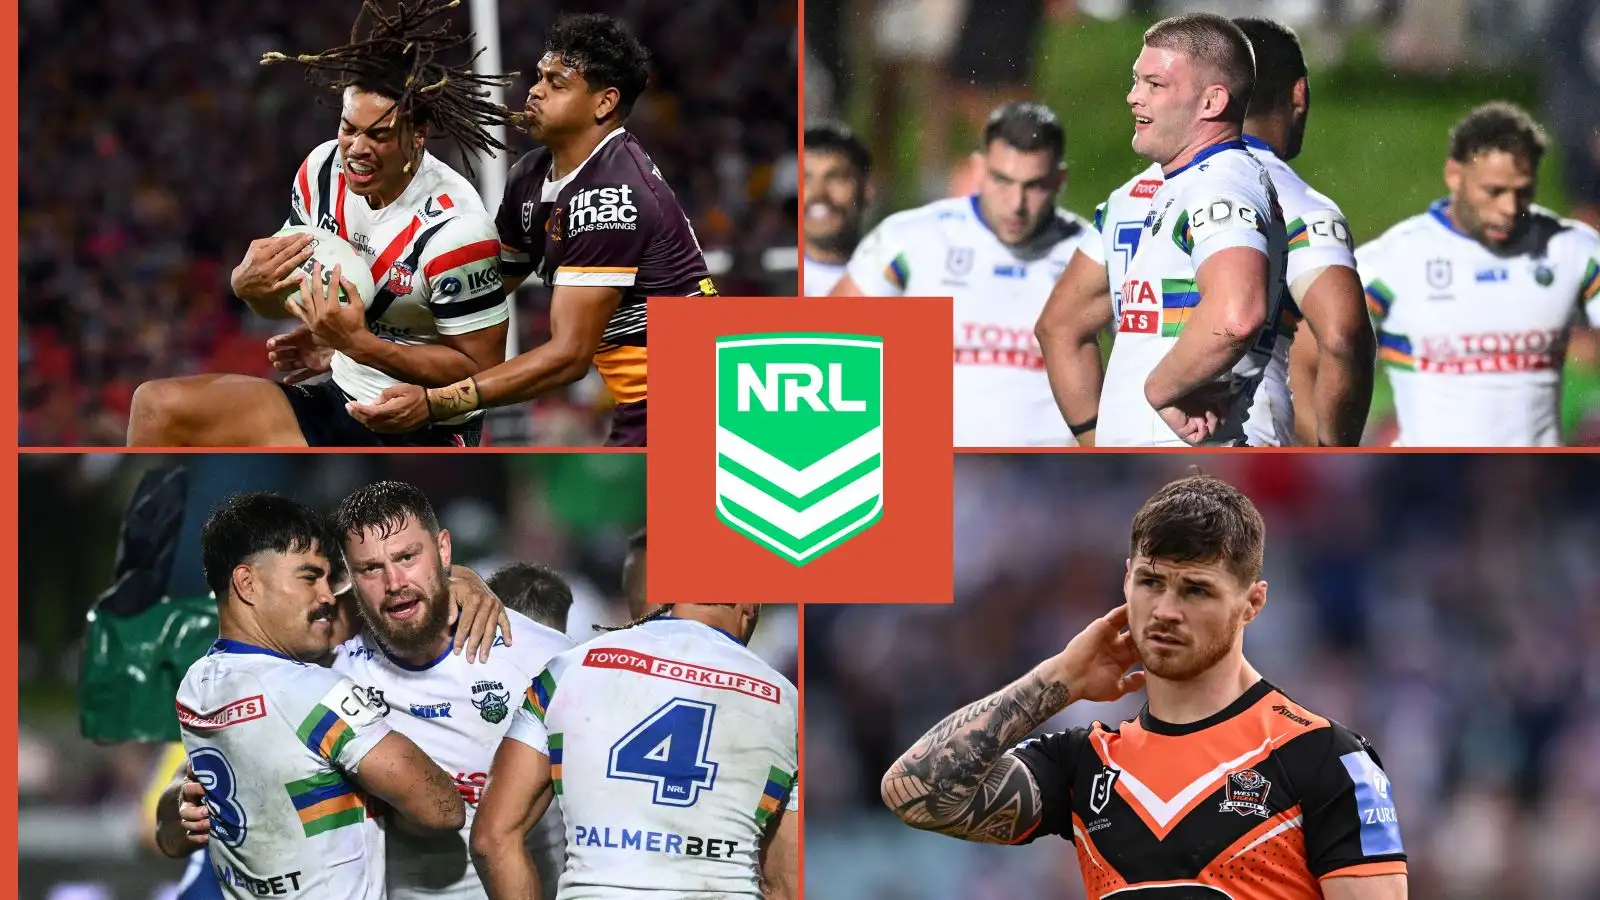 Brits Down Under: Whitehead scores two as Smithies, Bateman finish up as top tacklers